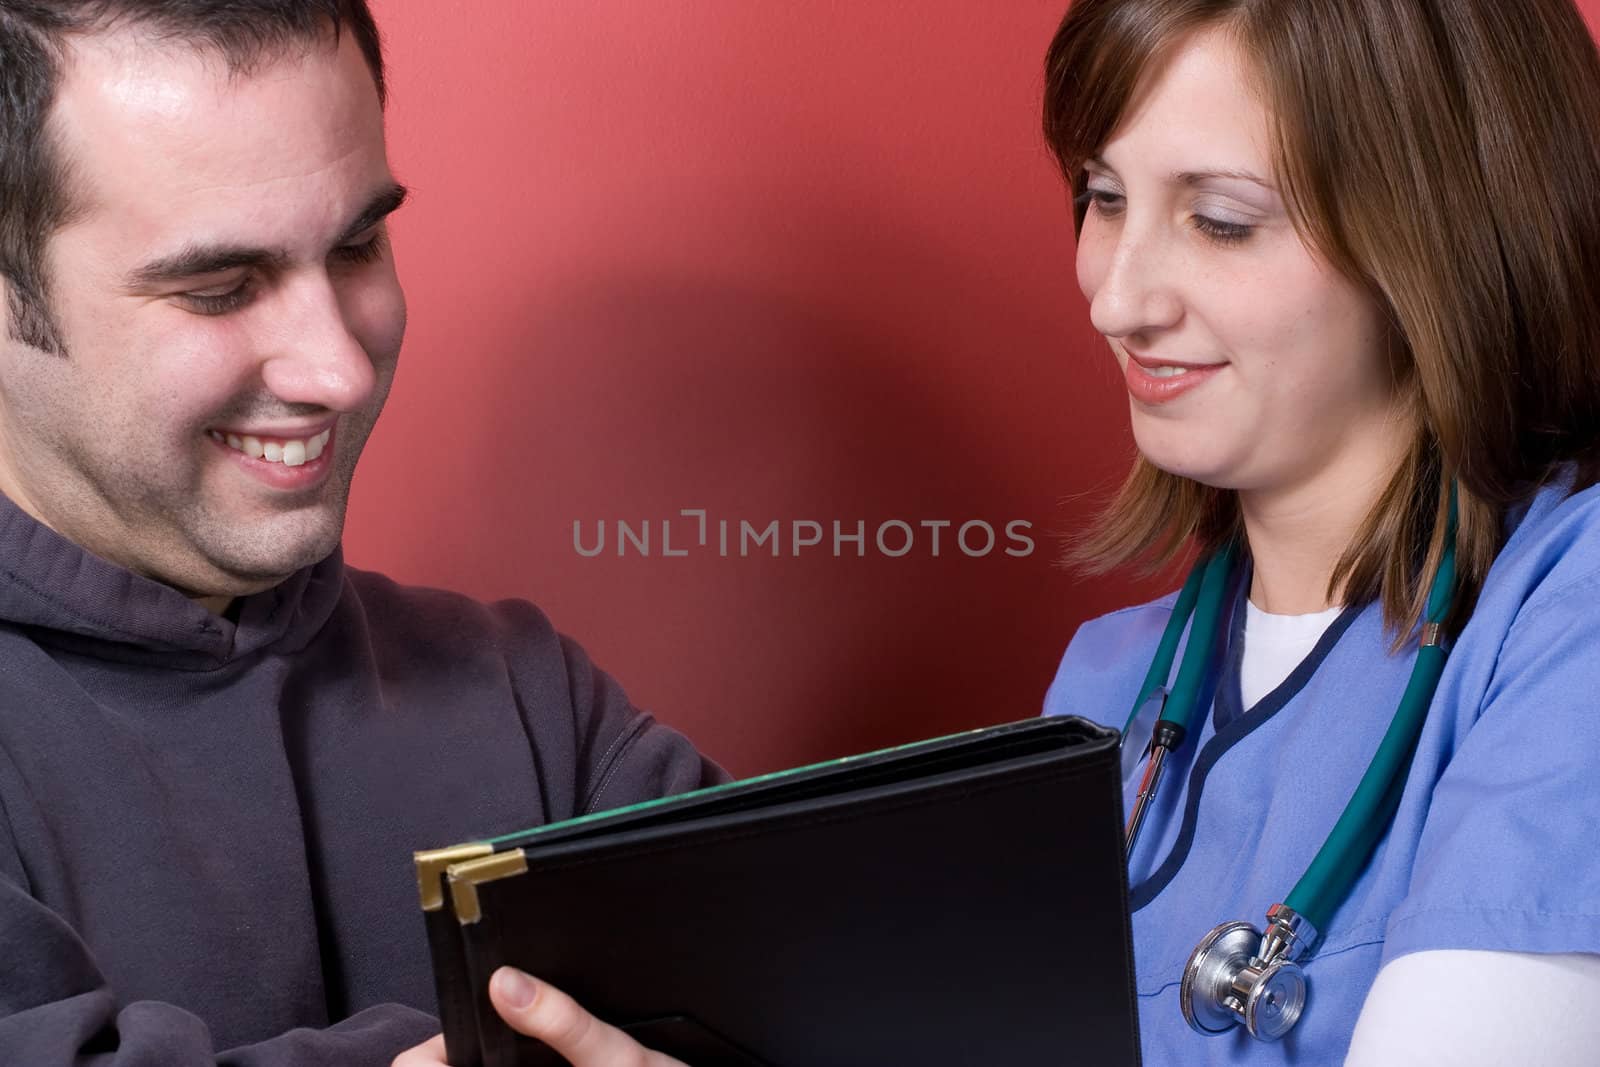 A young nurse sharing results with her patient during his visit.